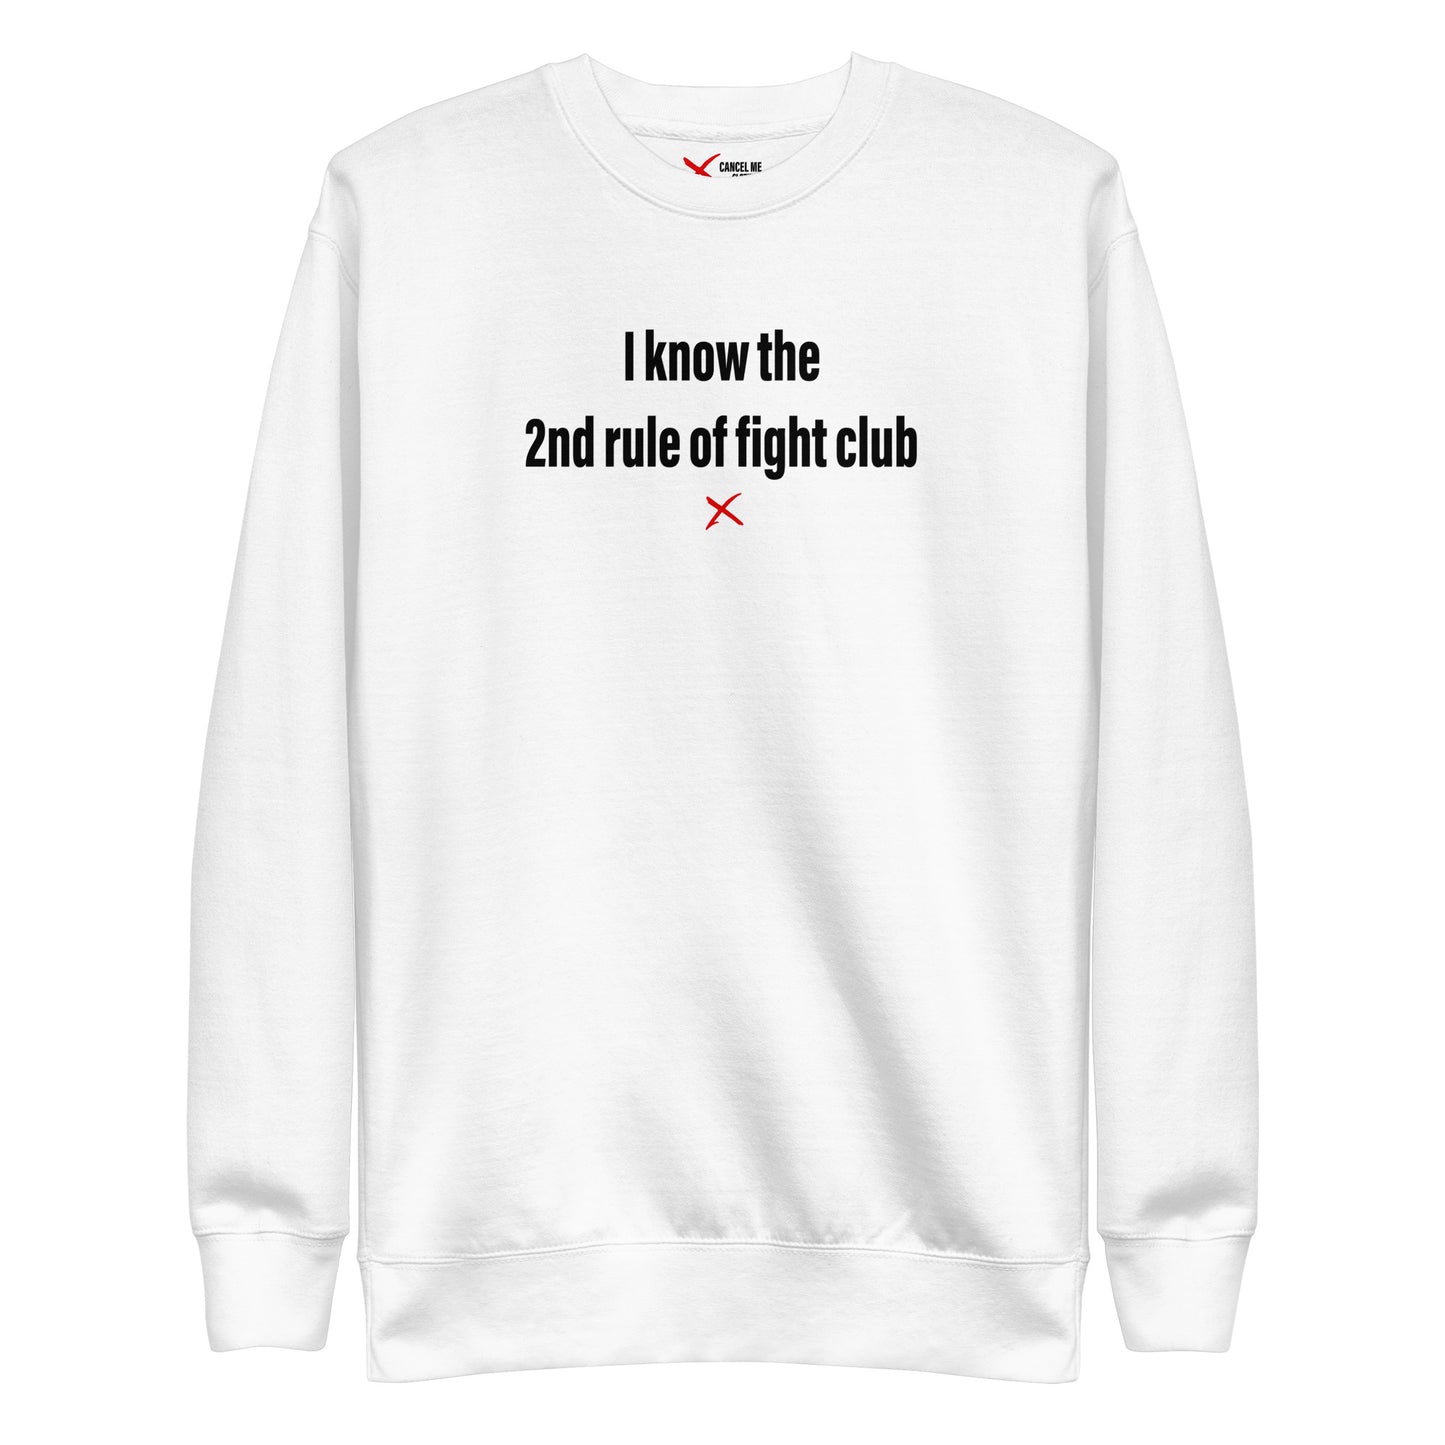 I know the 2nd rule of fight club - Sweatshirt